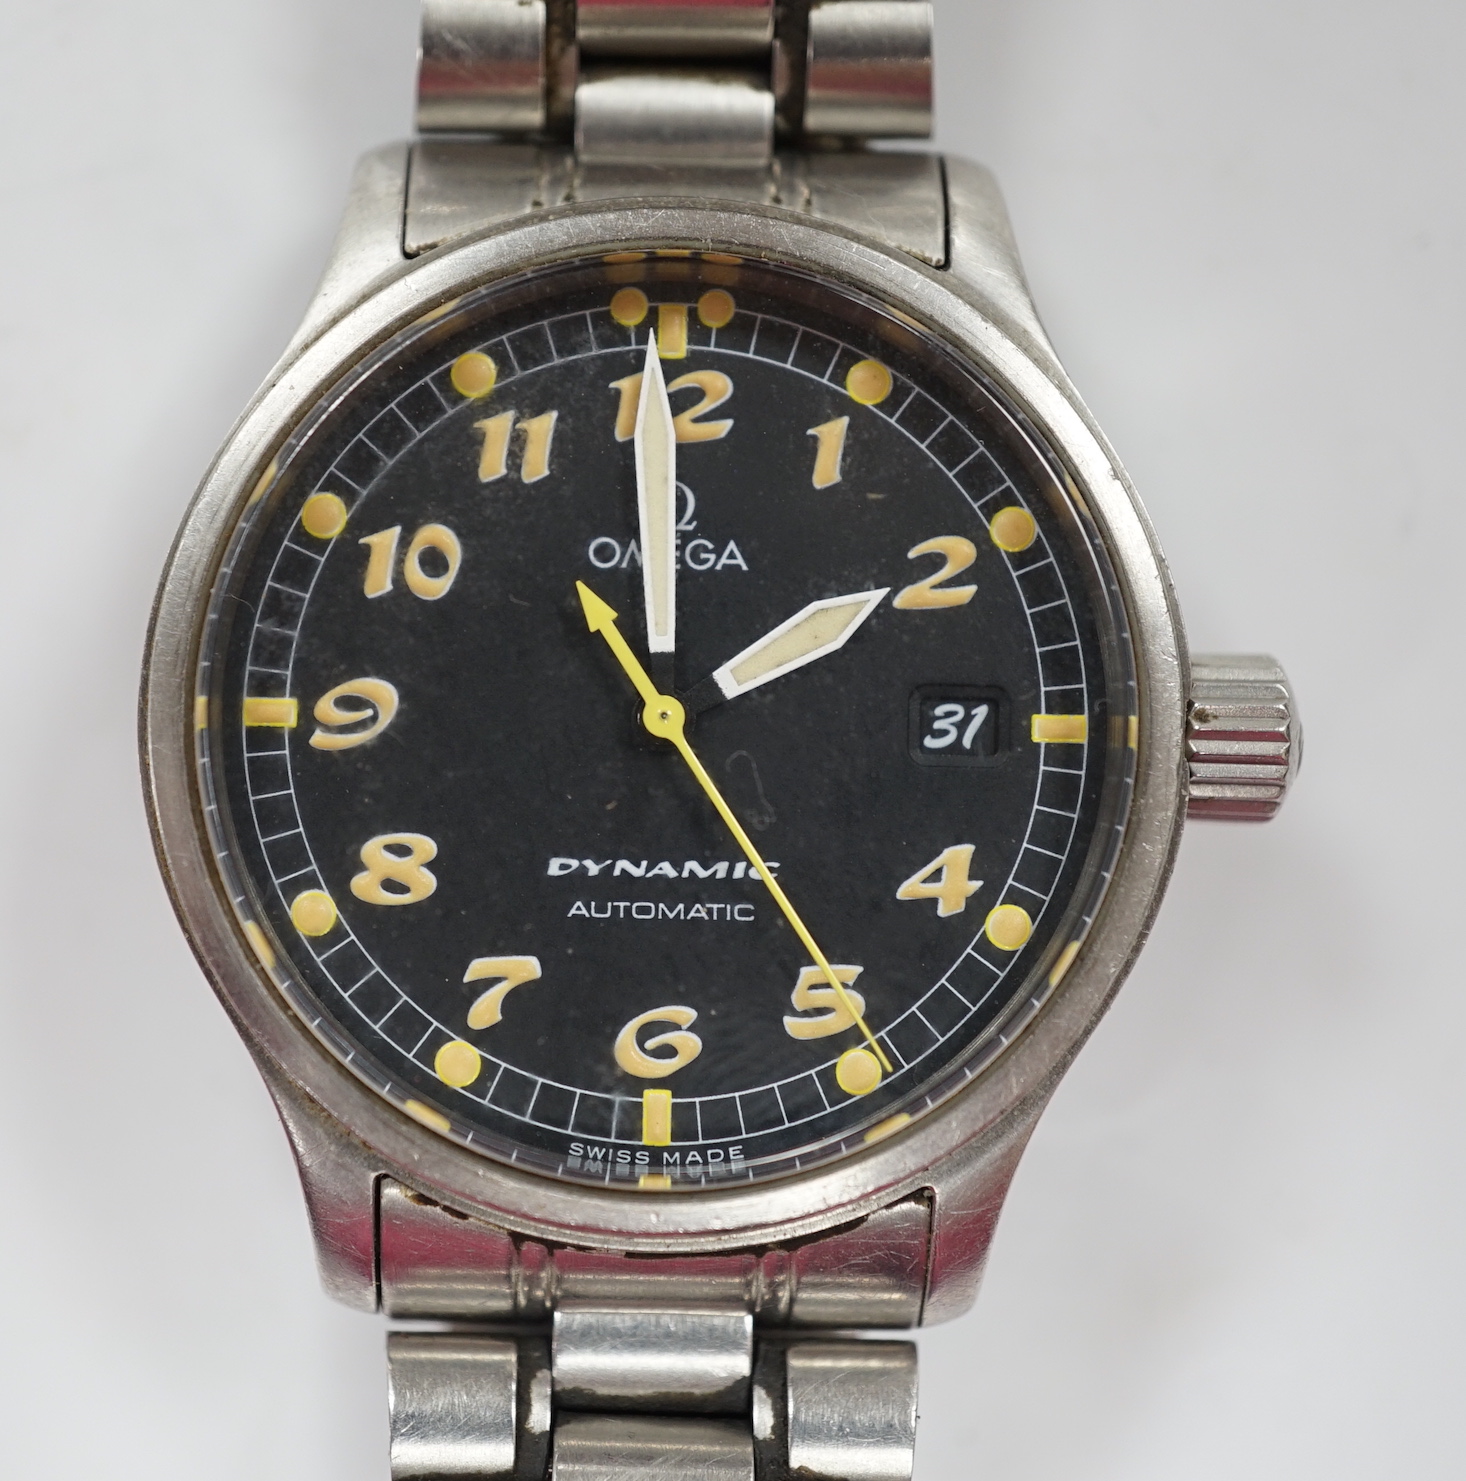 A gentleman's stainless steel Omega Dynamic automatic wrist watch, with black dial and date aperture, on a stainless steel bracelet, no box or papers, case diameter 37mm.